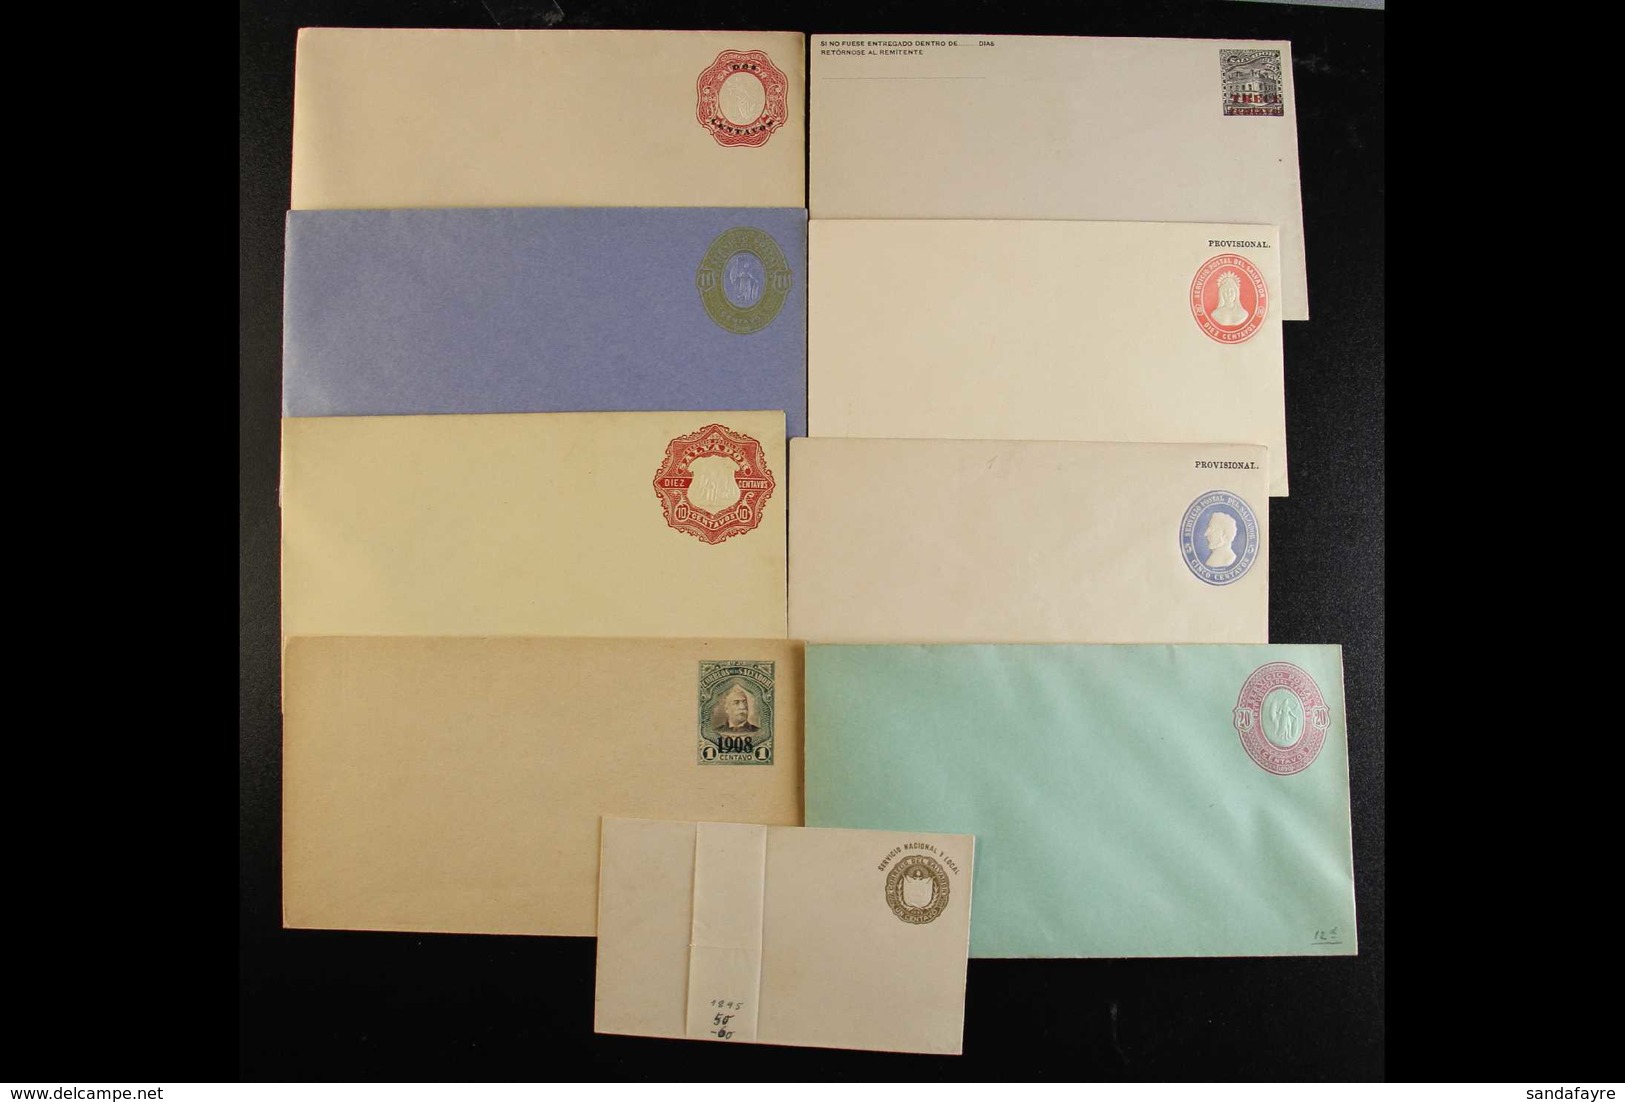 1887-1912 POSTAL STATIONERY  Unused Range Of ENVELOPES With A Good Range Of Issued Types, Different Denominations And Si - El Salvador